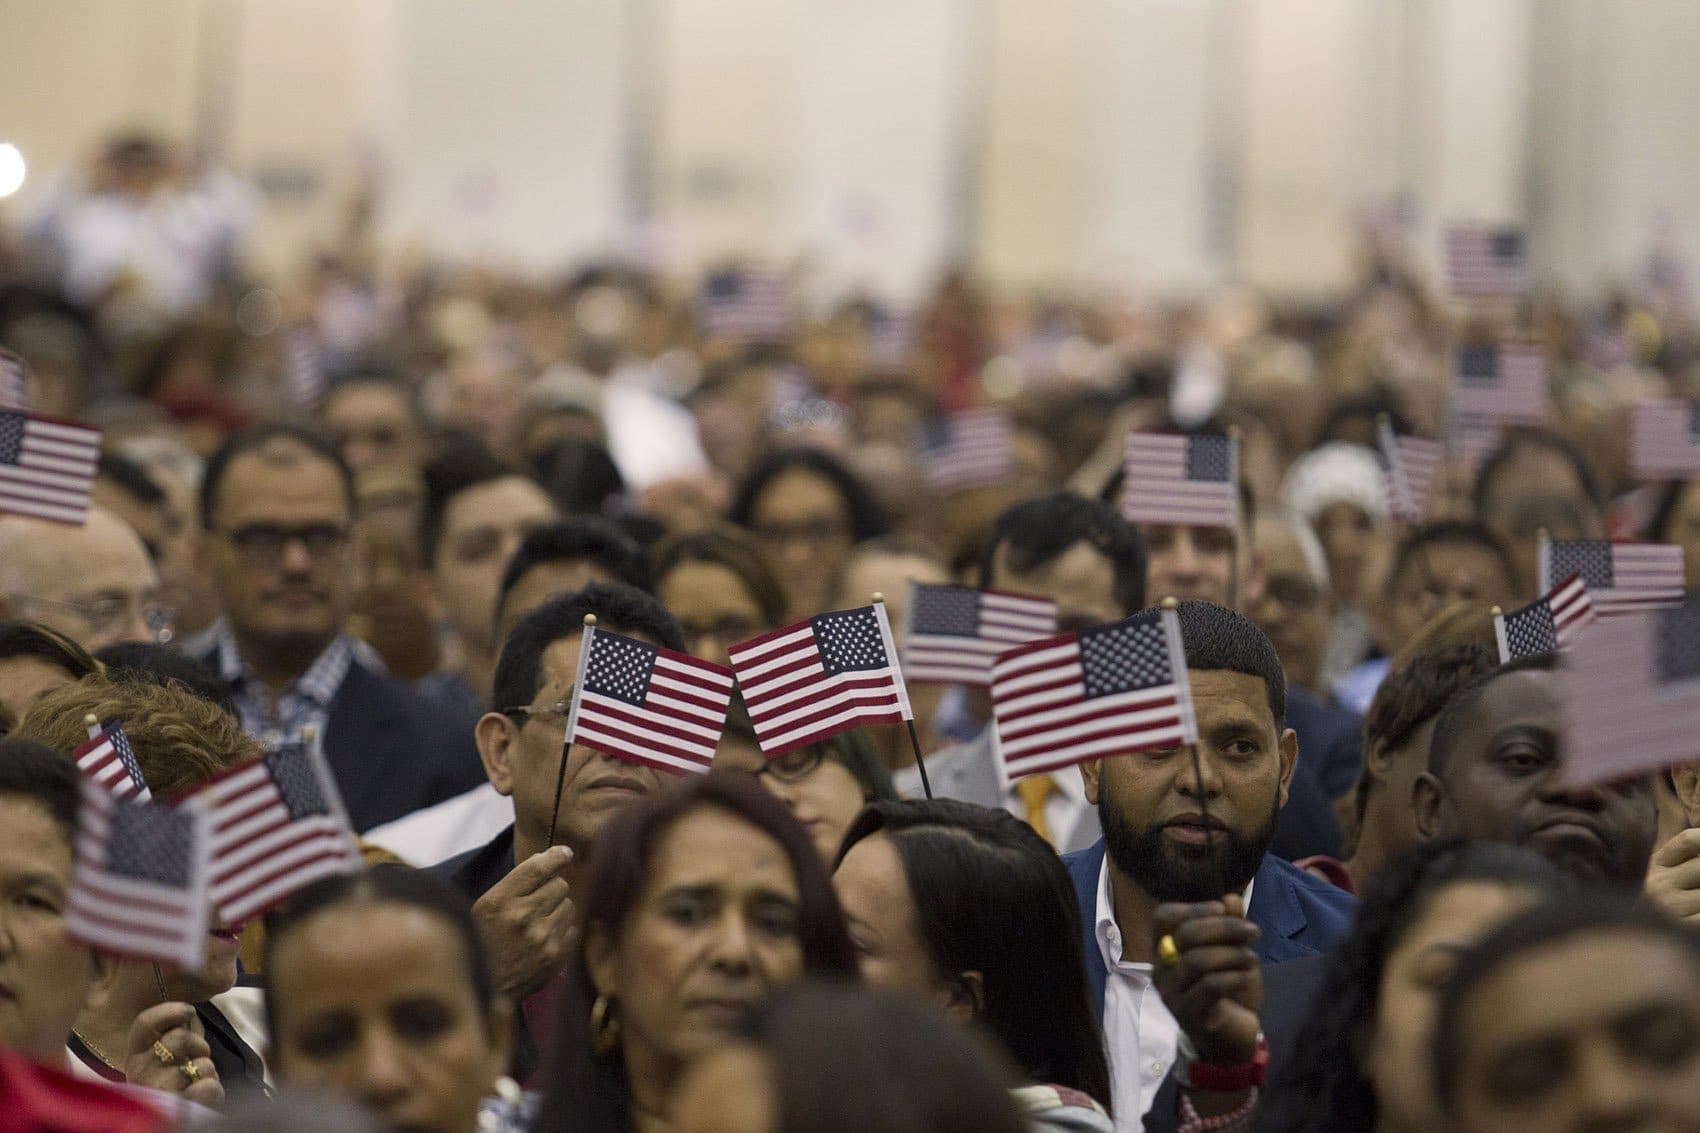 New U.S. citizens wave flags during a rendition of “America the Beautiful” at the Hynes Convention Center Thursday. (Joe Difazio for WBUR)